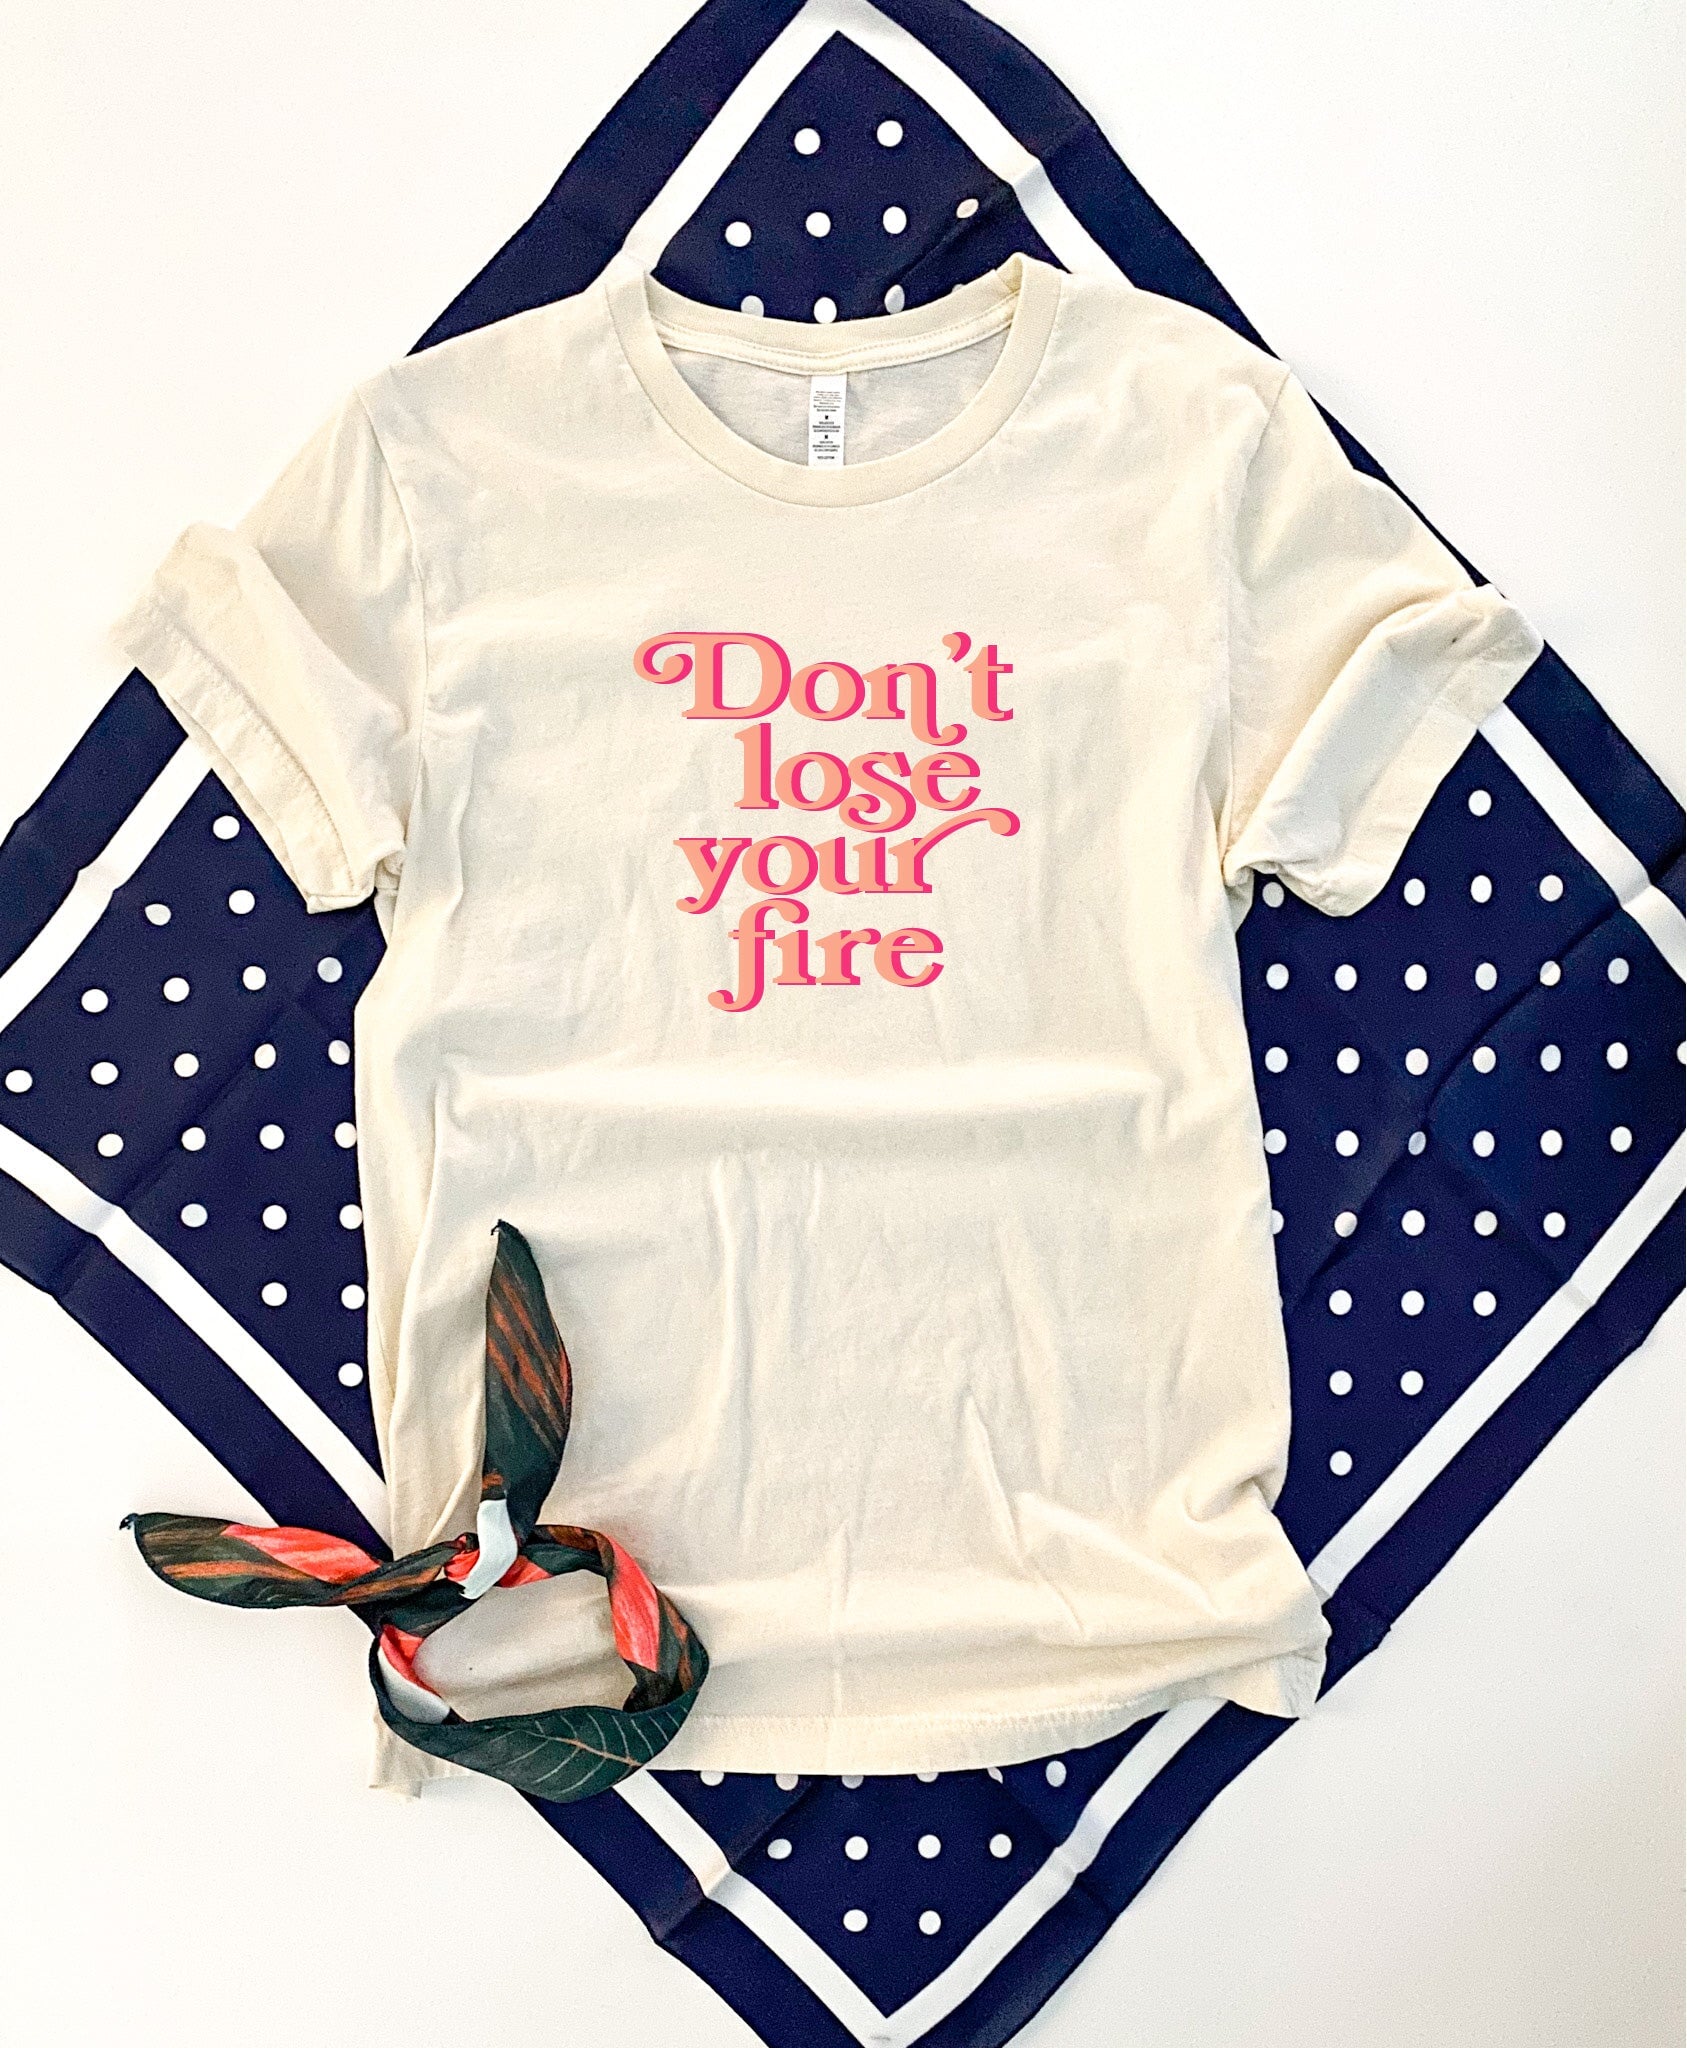 Don’t lose your fire tee Affirmation collection Bella Canvas 3001 